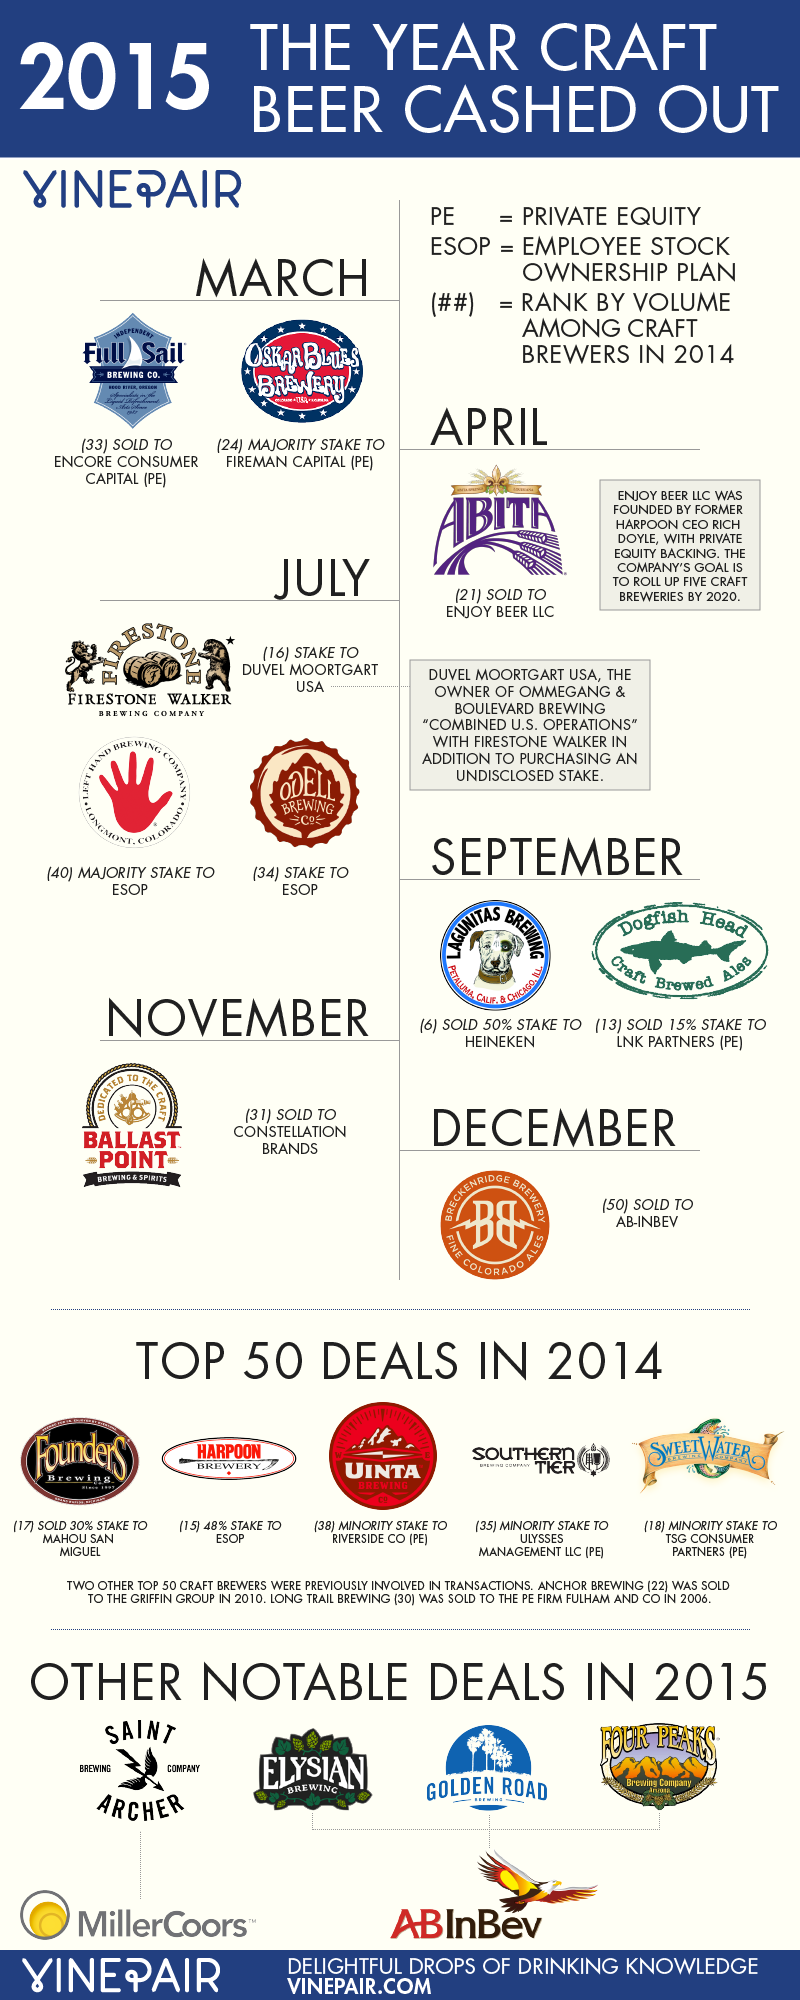 INFOGRAPHIC: All The Craft Beer Sales And Investments From 2015